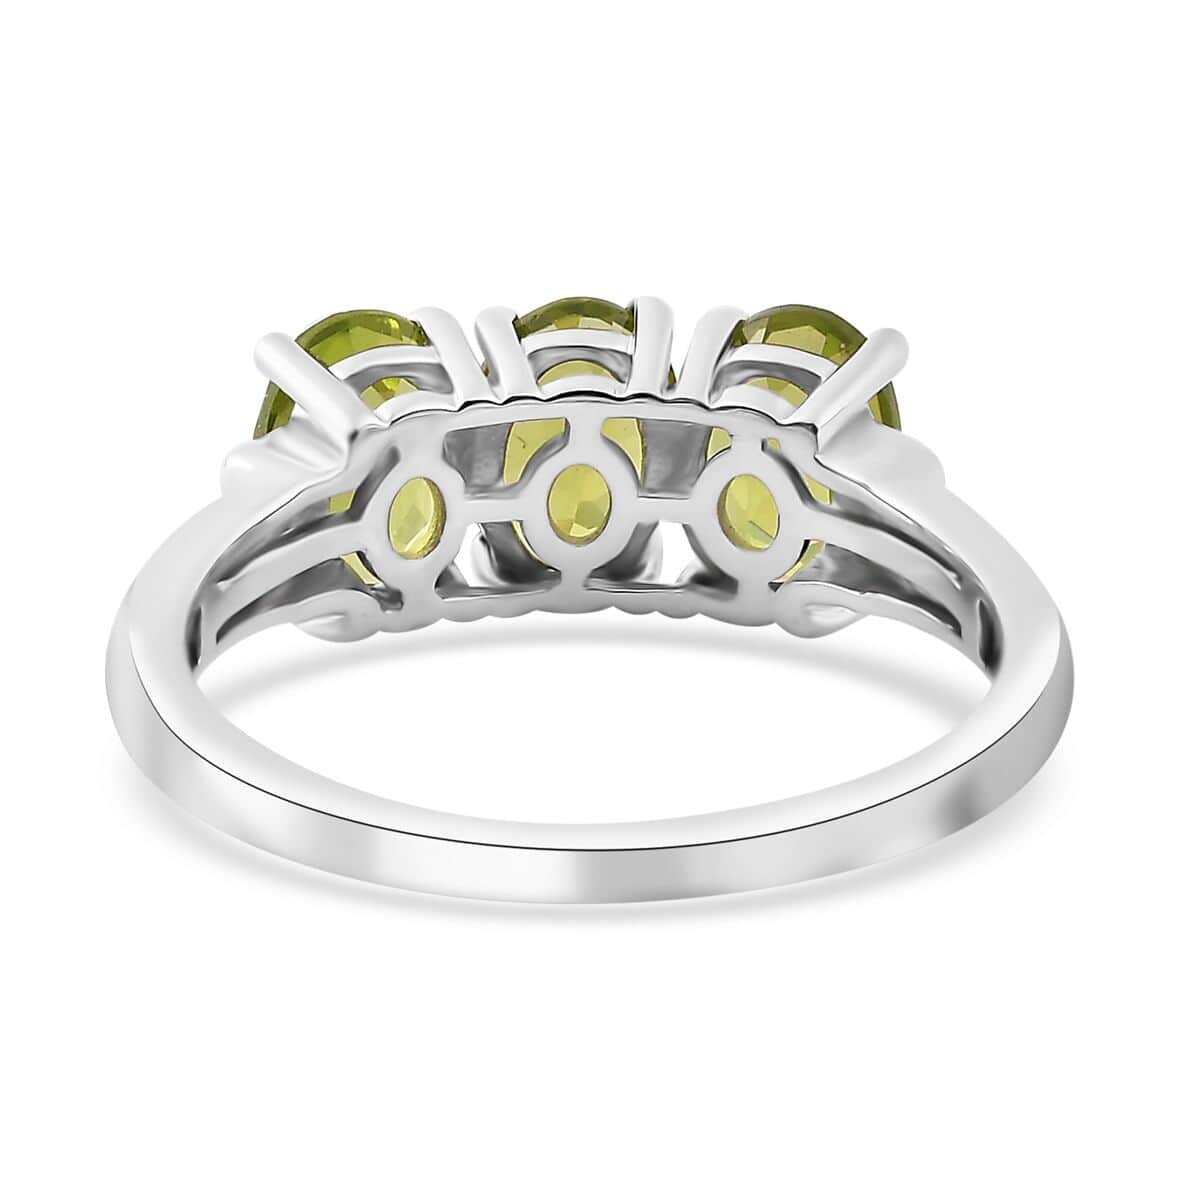 Arizona Peridot and Natural Champagne Diamond Accent 3 Stone Ring in Platinum Over Sterling Silver 2.50 ctw (Del. in 10-12 Days) image number 4